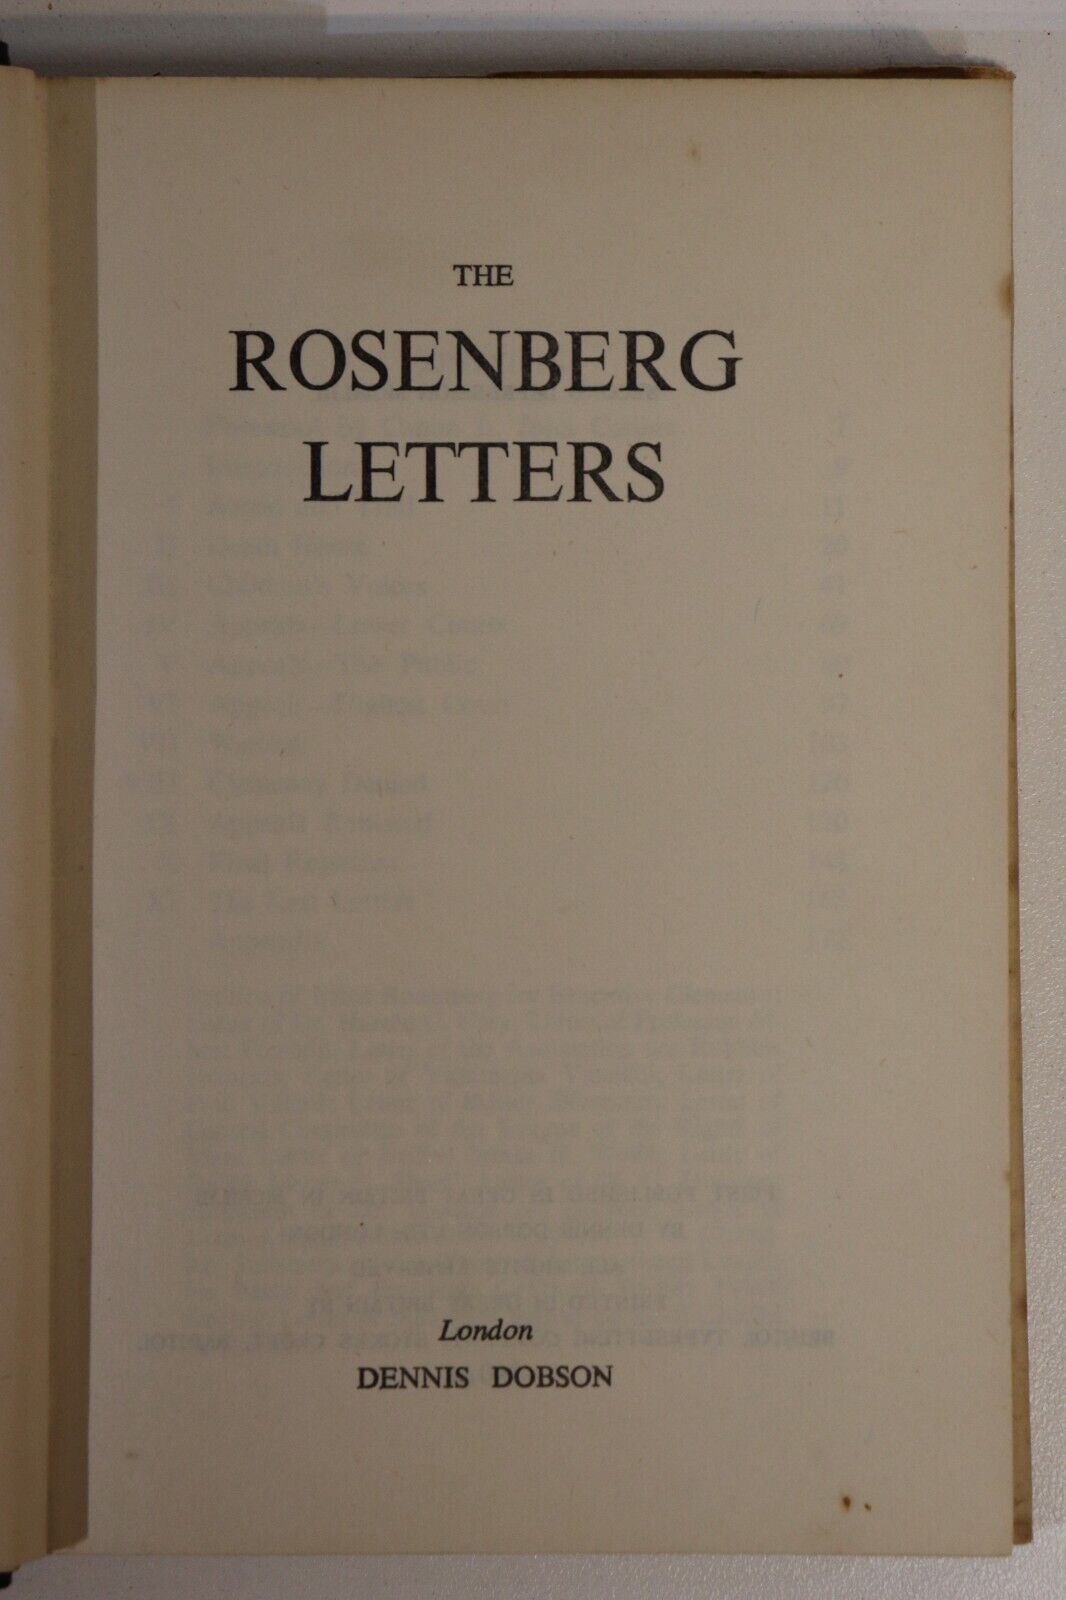 The Rosenberg Letters - 1953 - American History Book - 0